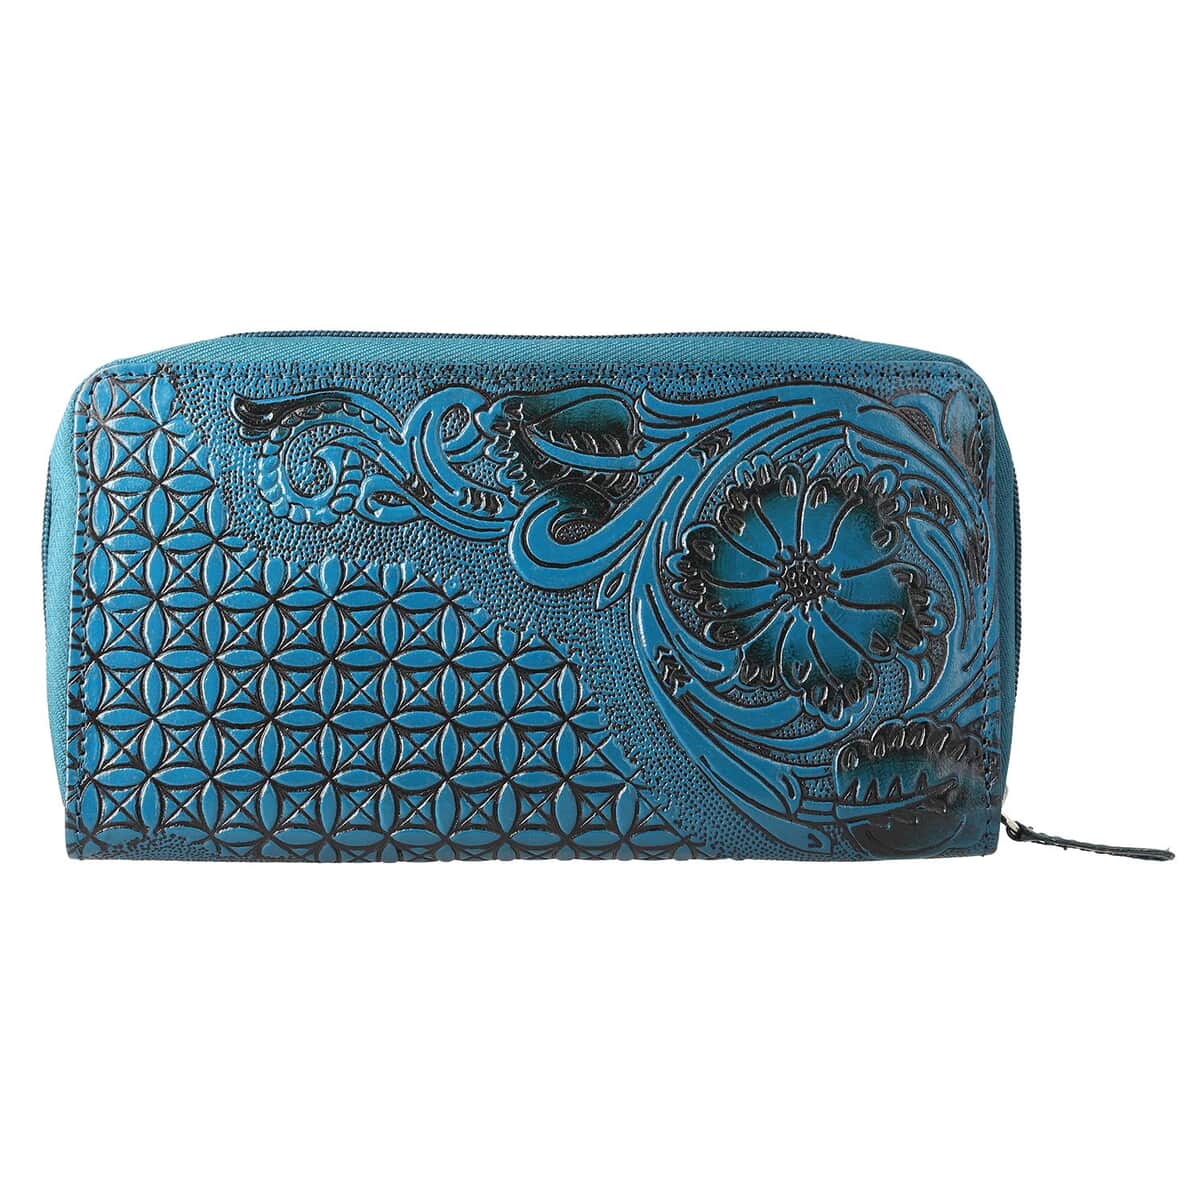 "RFID Protected hand floral embossed Leather Women's Wallet  SIZE: 8(L)x1(W)x4.25(H) inches COLOR: Green" image number 0